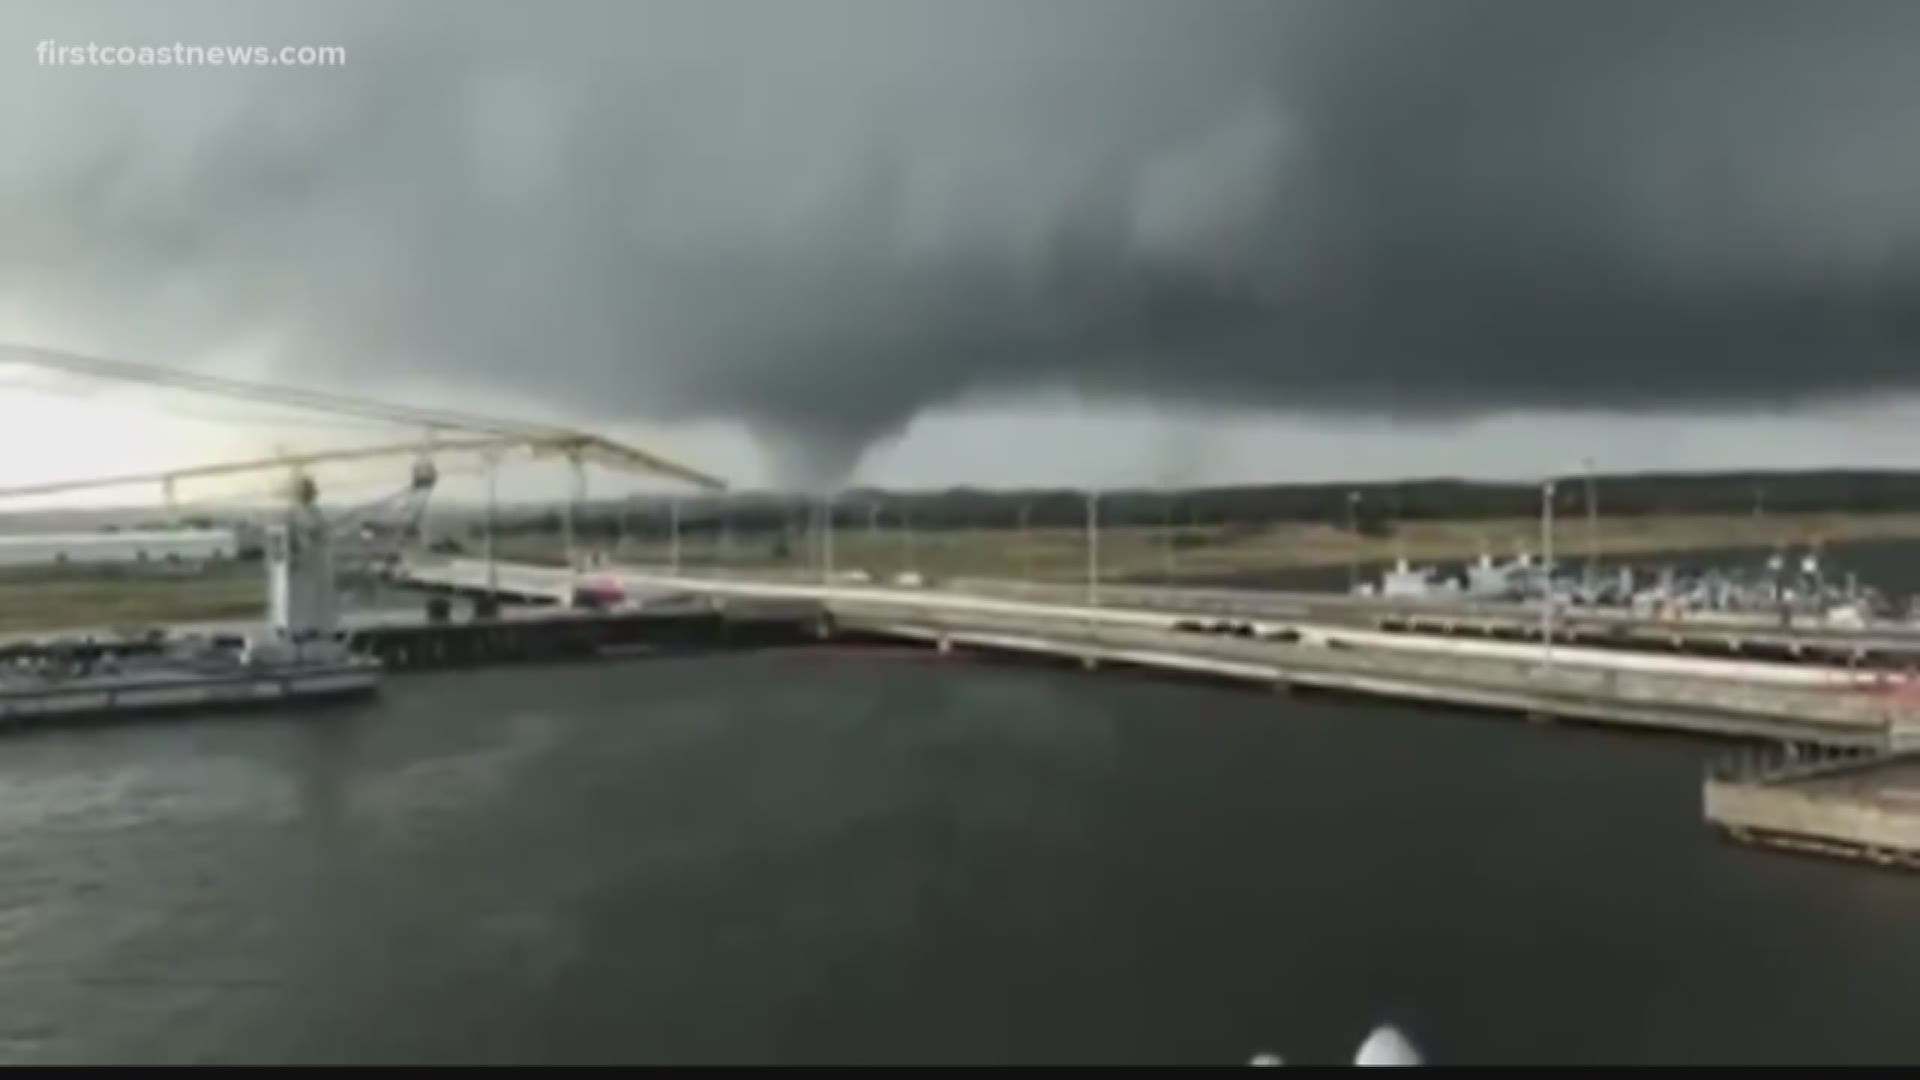 Five people were injured Sunday after a tornado hit Naval Submarine Base Kings Bay, according to a spokesperson.